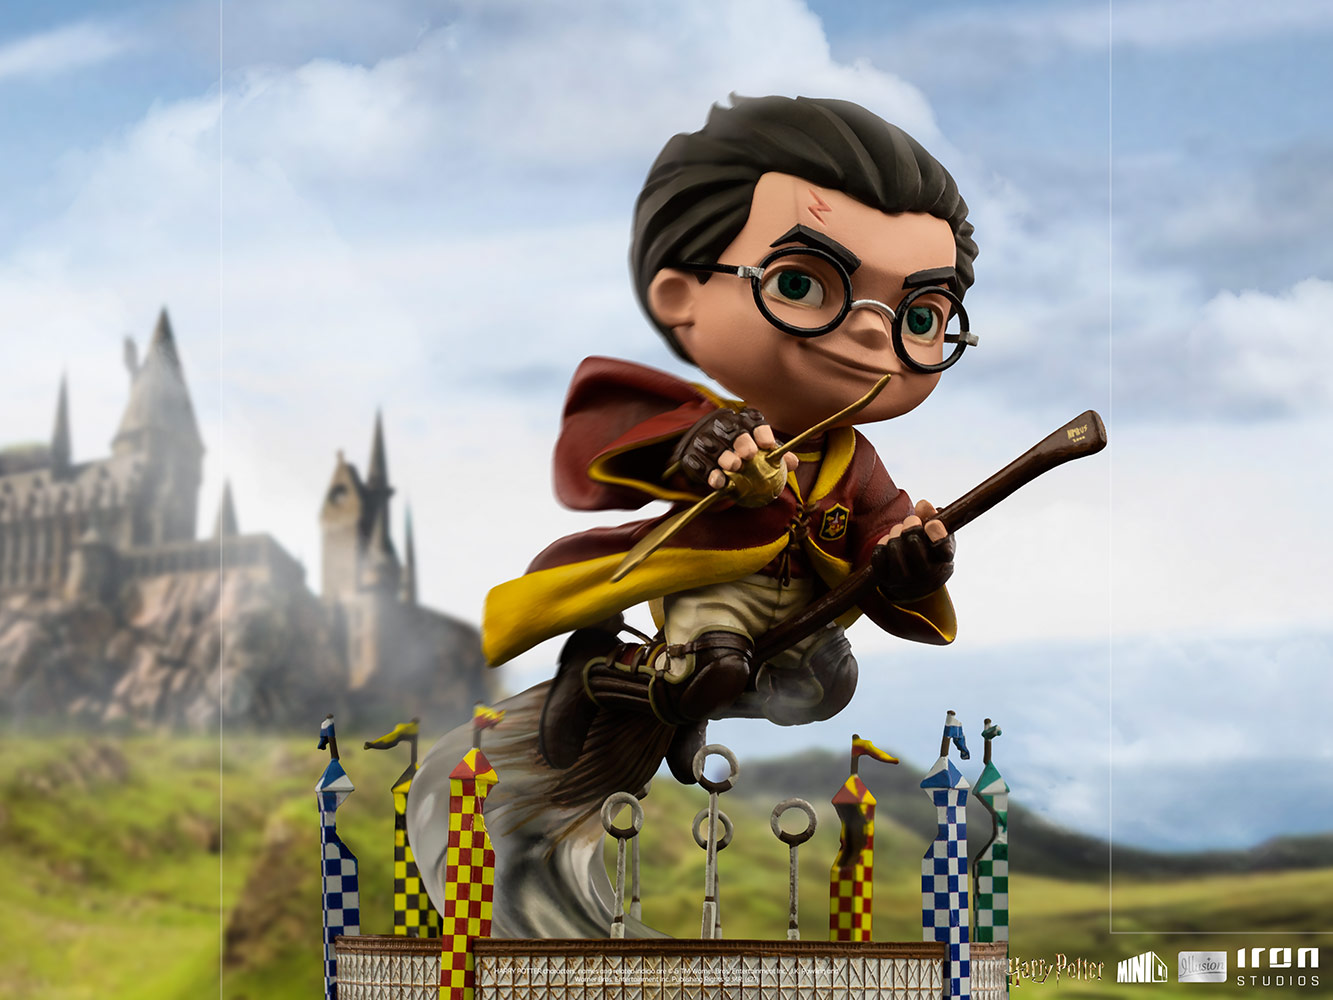 Harry Potter at the Quidditch Match Mini Co.